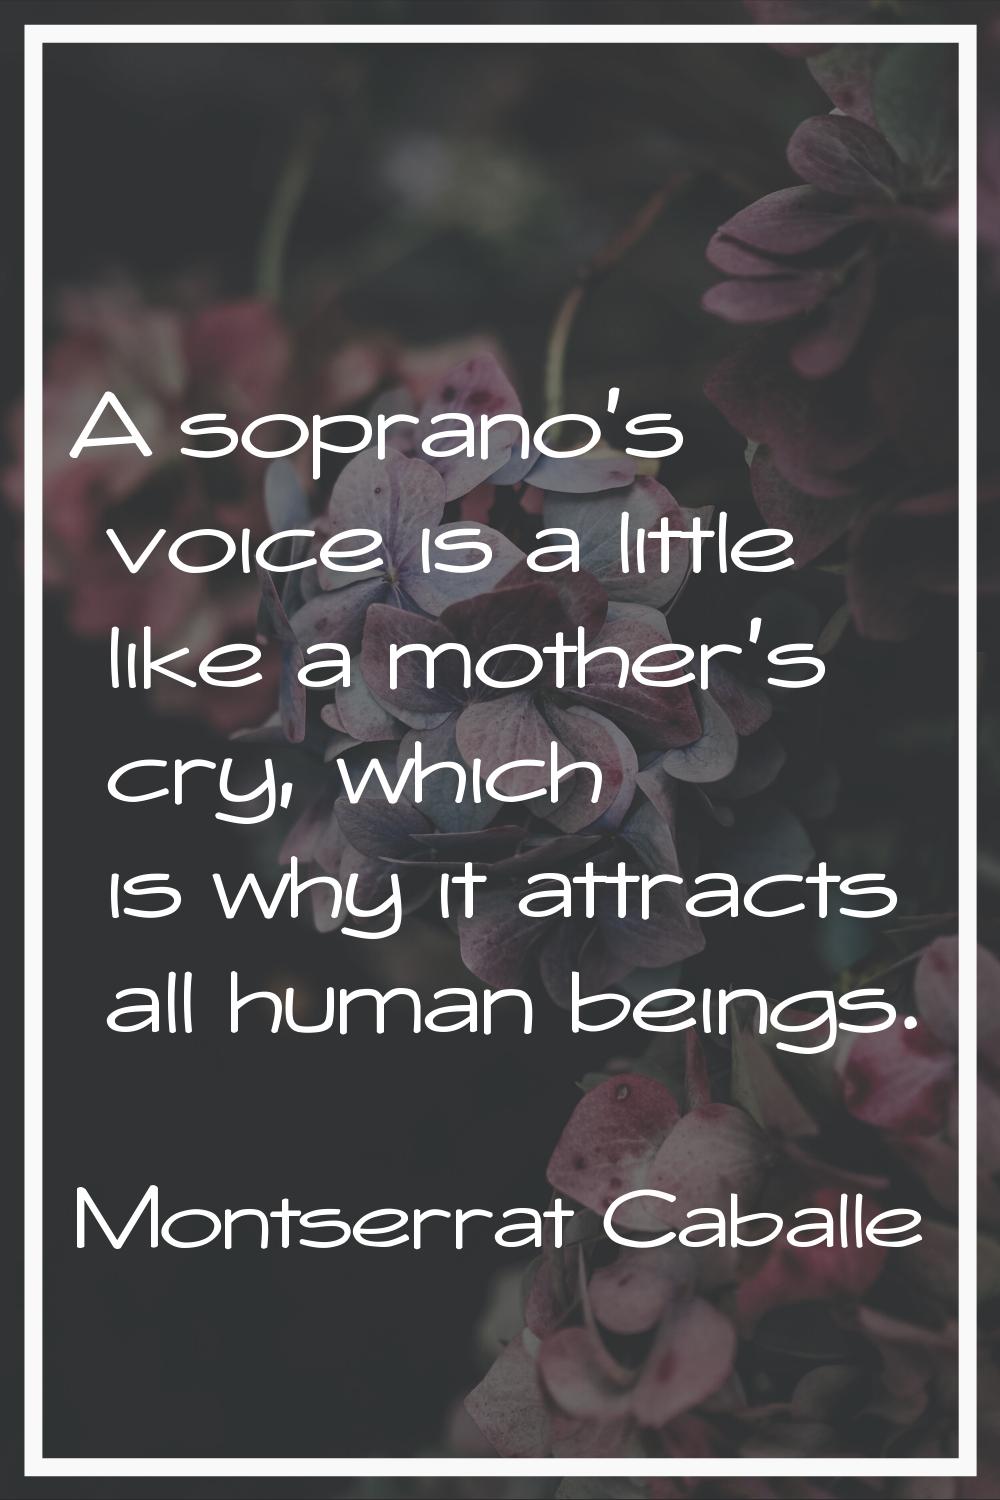 A soprano's voice is a little like a mother's cry, which is why it attracts all human beings.